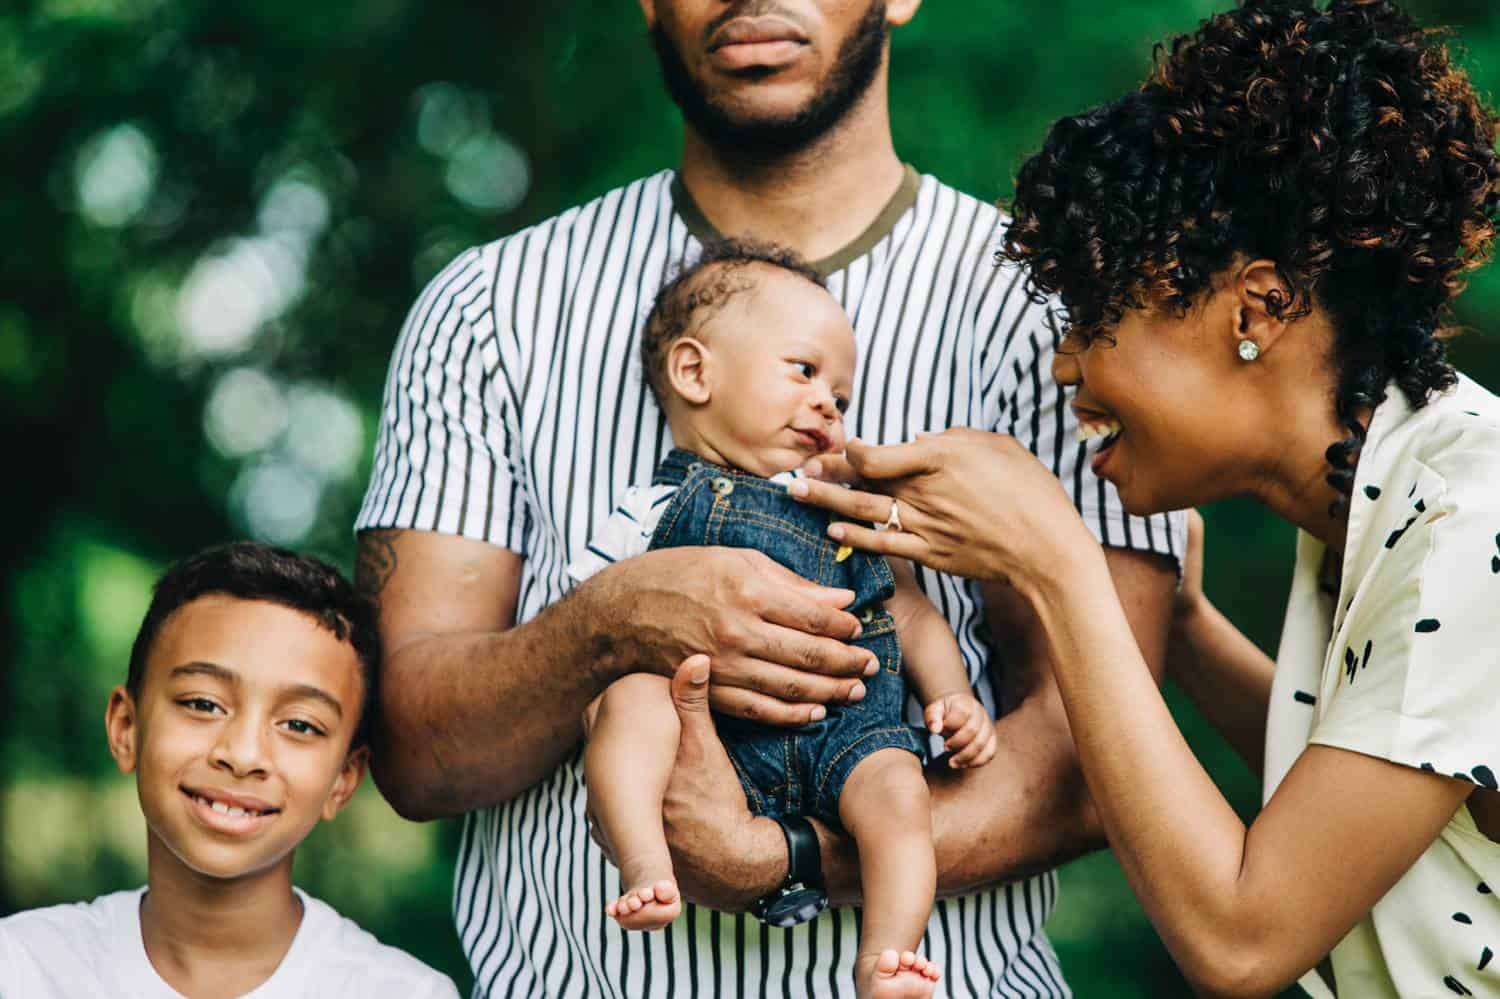 A Black family stands close together for an outdoor portrait. The father is holding their infant baby, while the mother tickles the baby's cheek. An older son stands close to his dad, smiling.